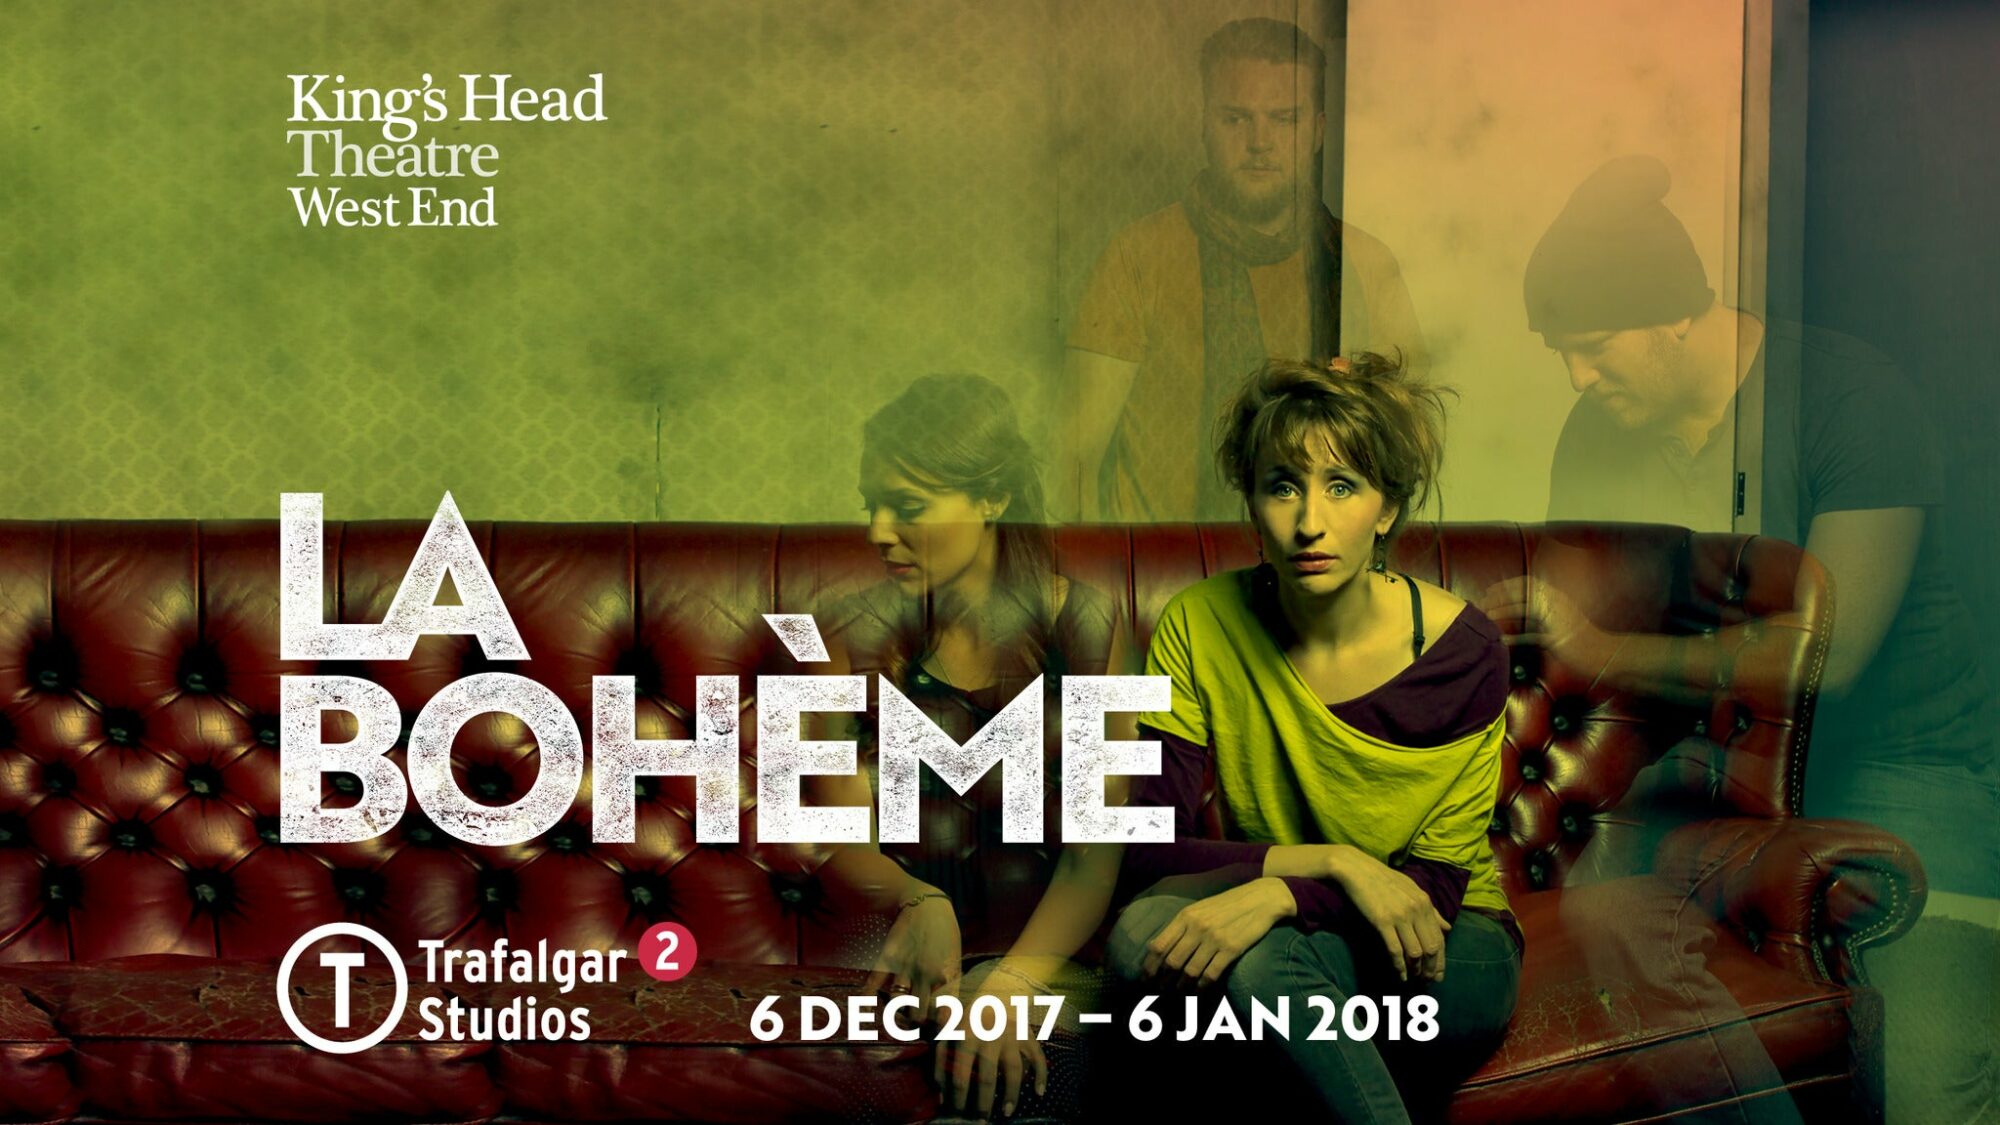 La Boheme performed by the Ukrainian National Opera at Scarborough Spa Grand Hall, Scarborough